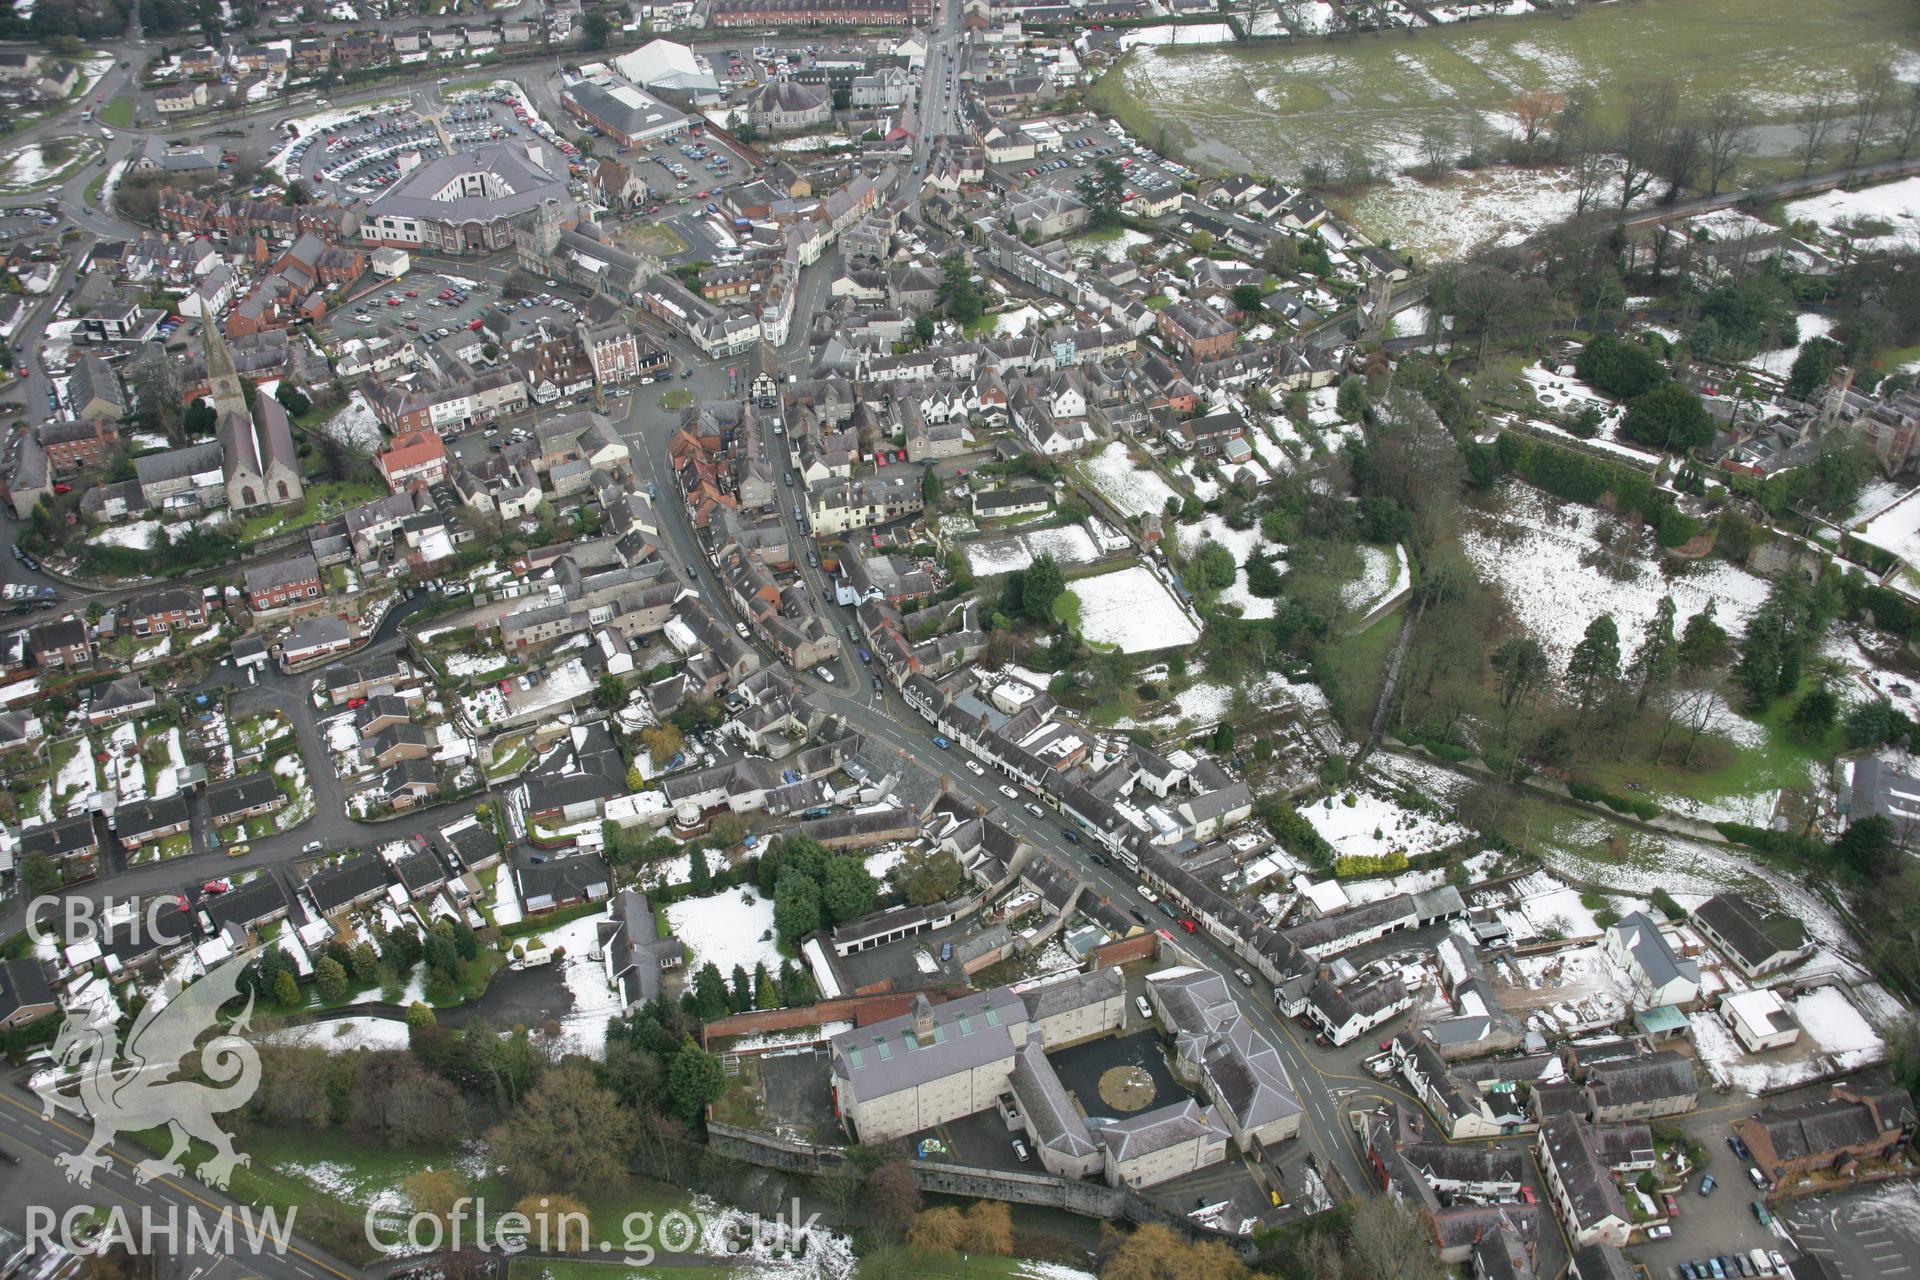 RCAHMW colour oblique aerial photograph of Ruthin. A winter landscape view from the west. Taken on 06 March 2006 by Toby Driver.